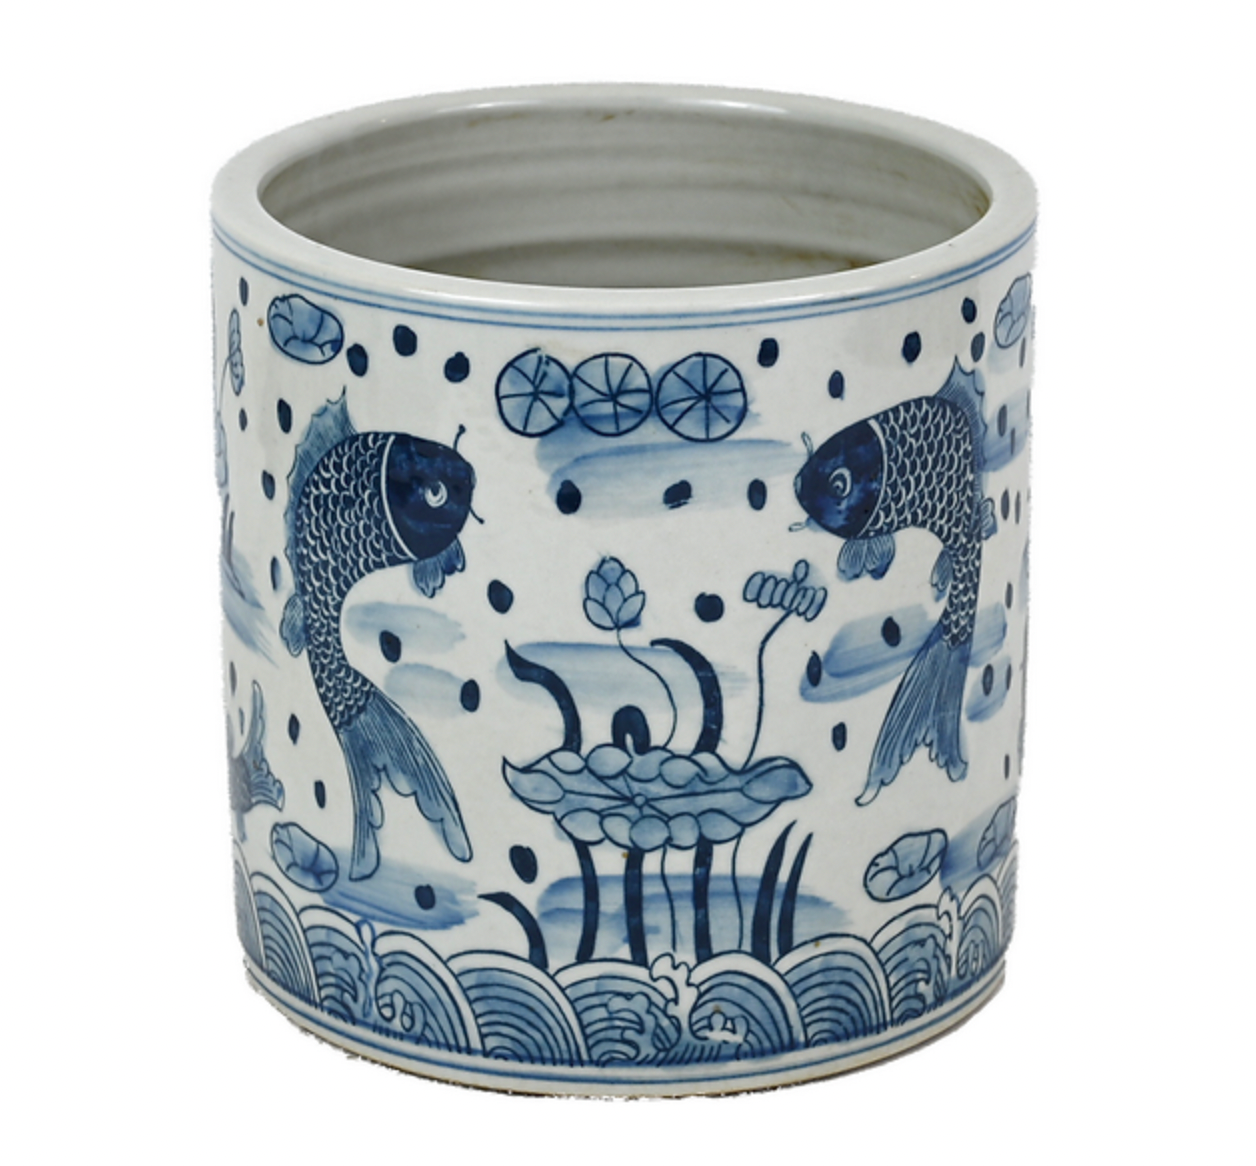 Porcelain Blue and White Brush Pot with Fish